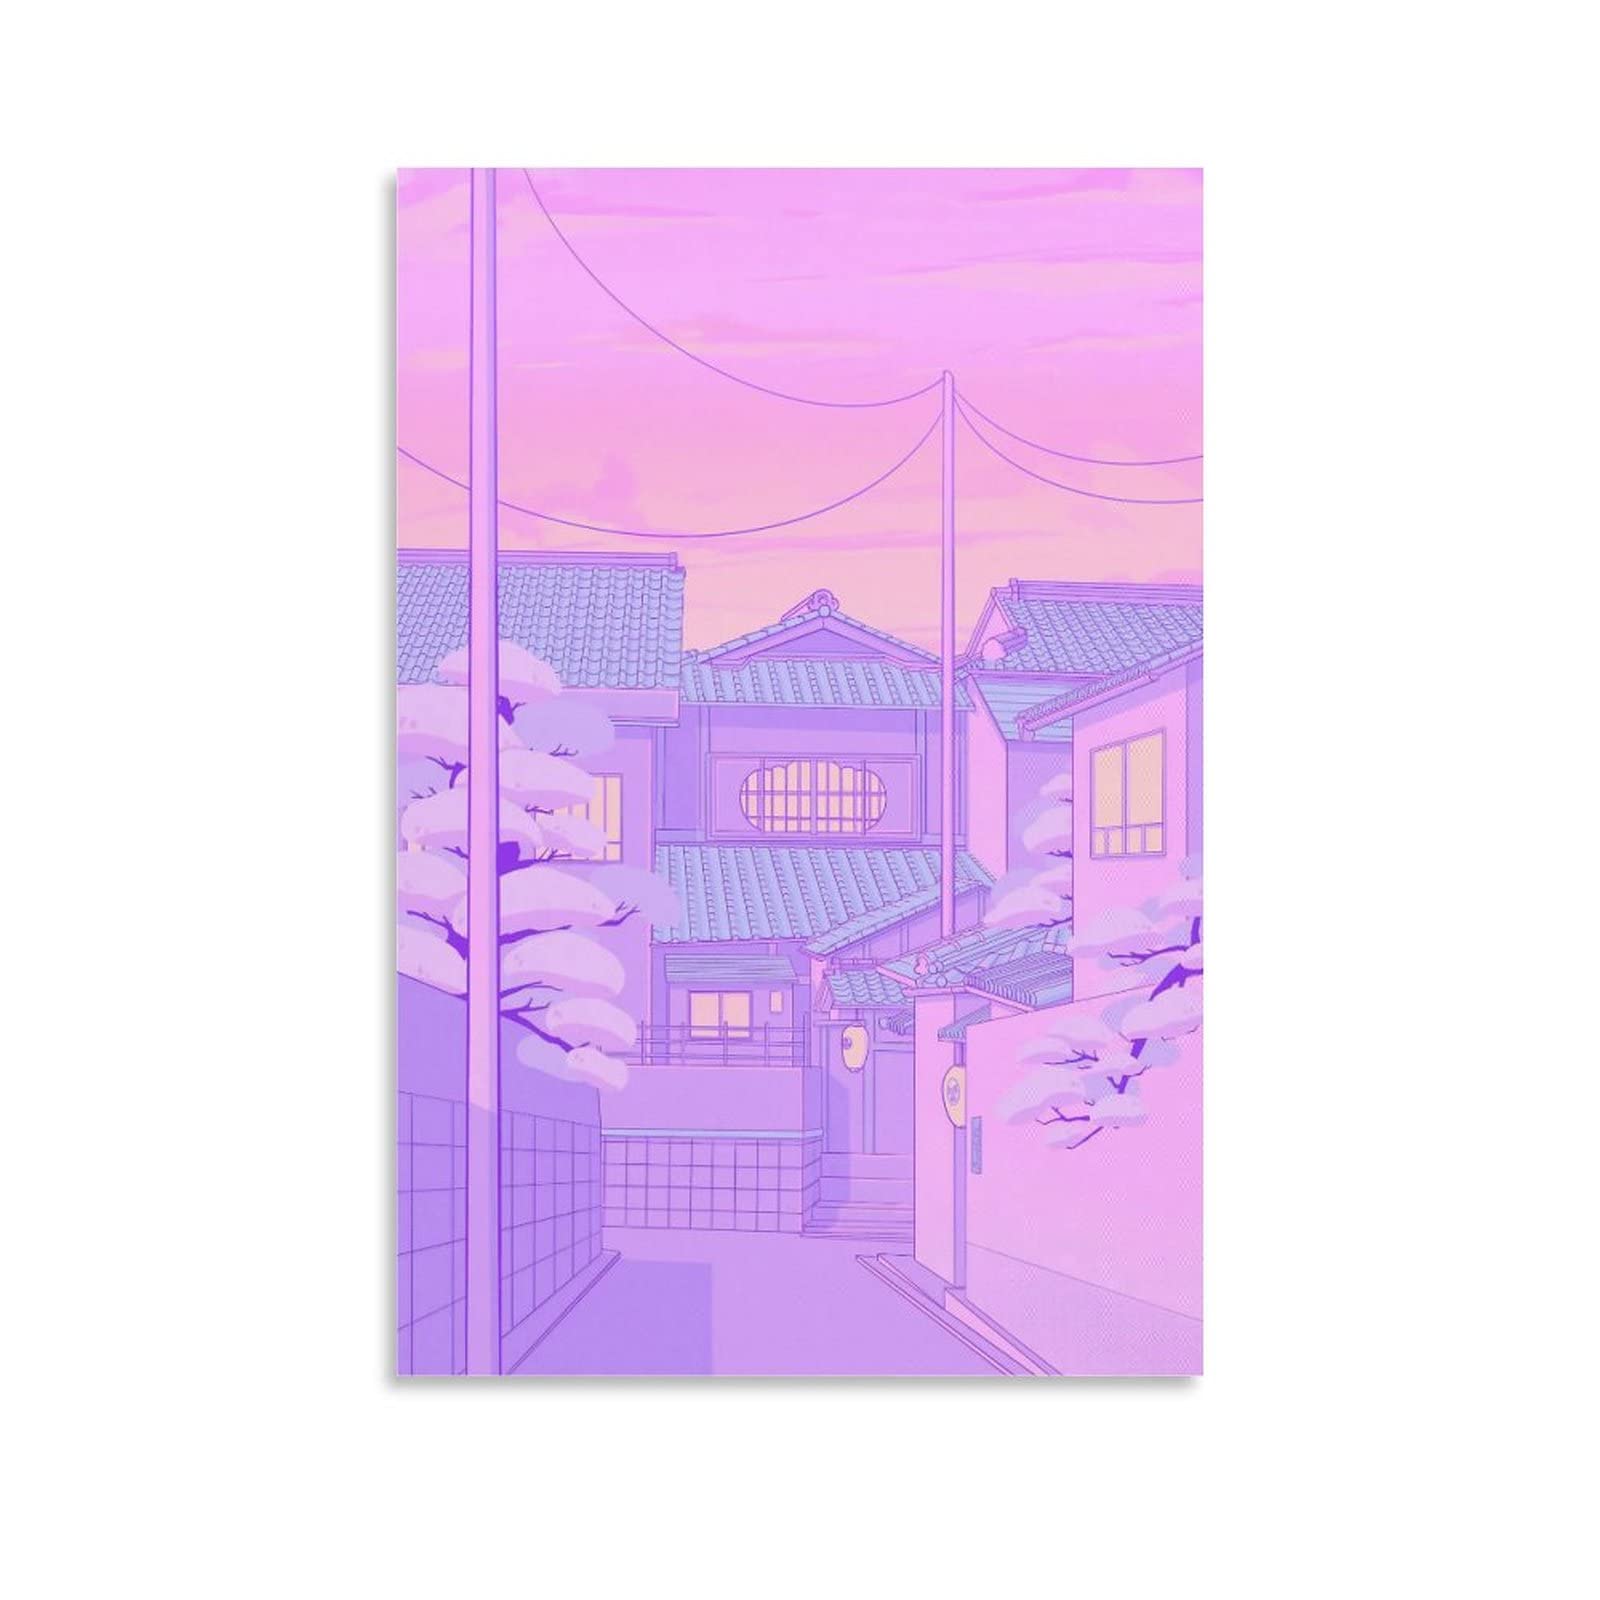 ERUABDB Cool Posters，Aesthetic Anime Tokyo City Cute Pastel， Modern Family Bedroom Decor Posters for Room Aesthetic 20x30inch(50x75cm): Posters & Prints